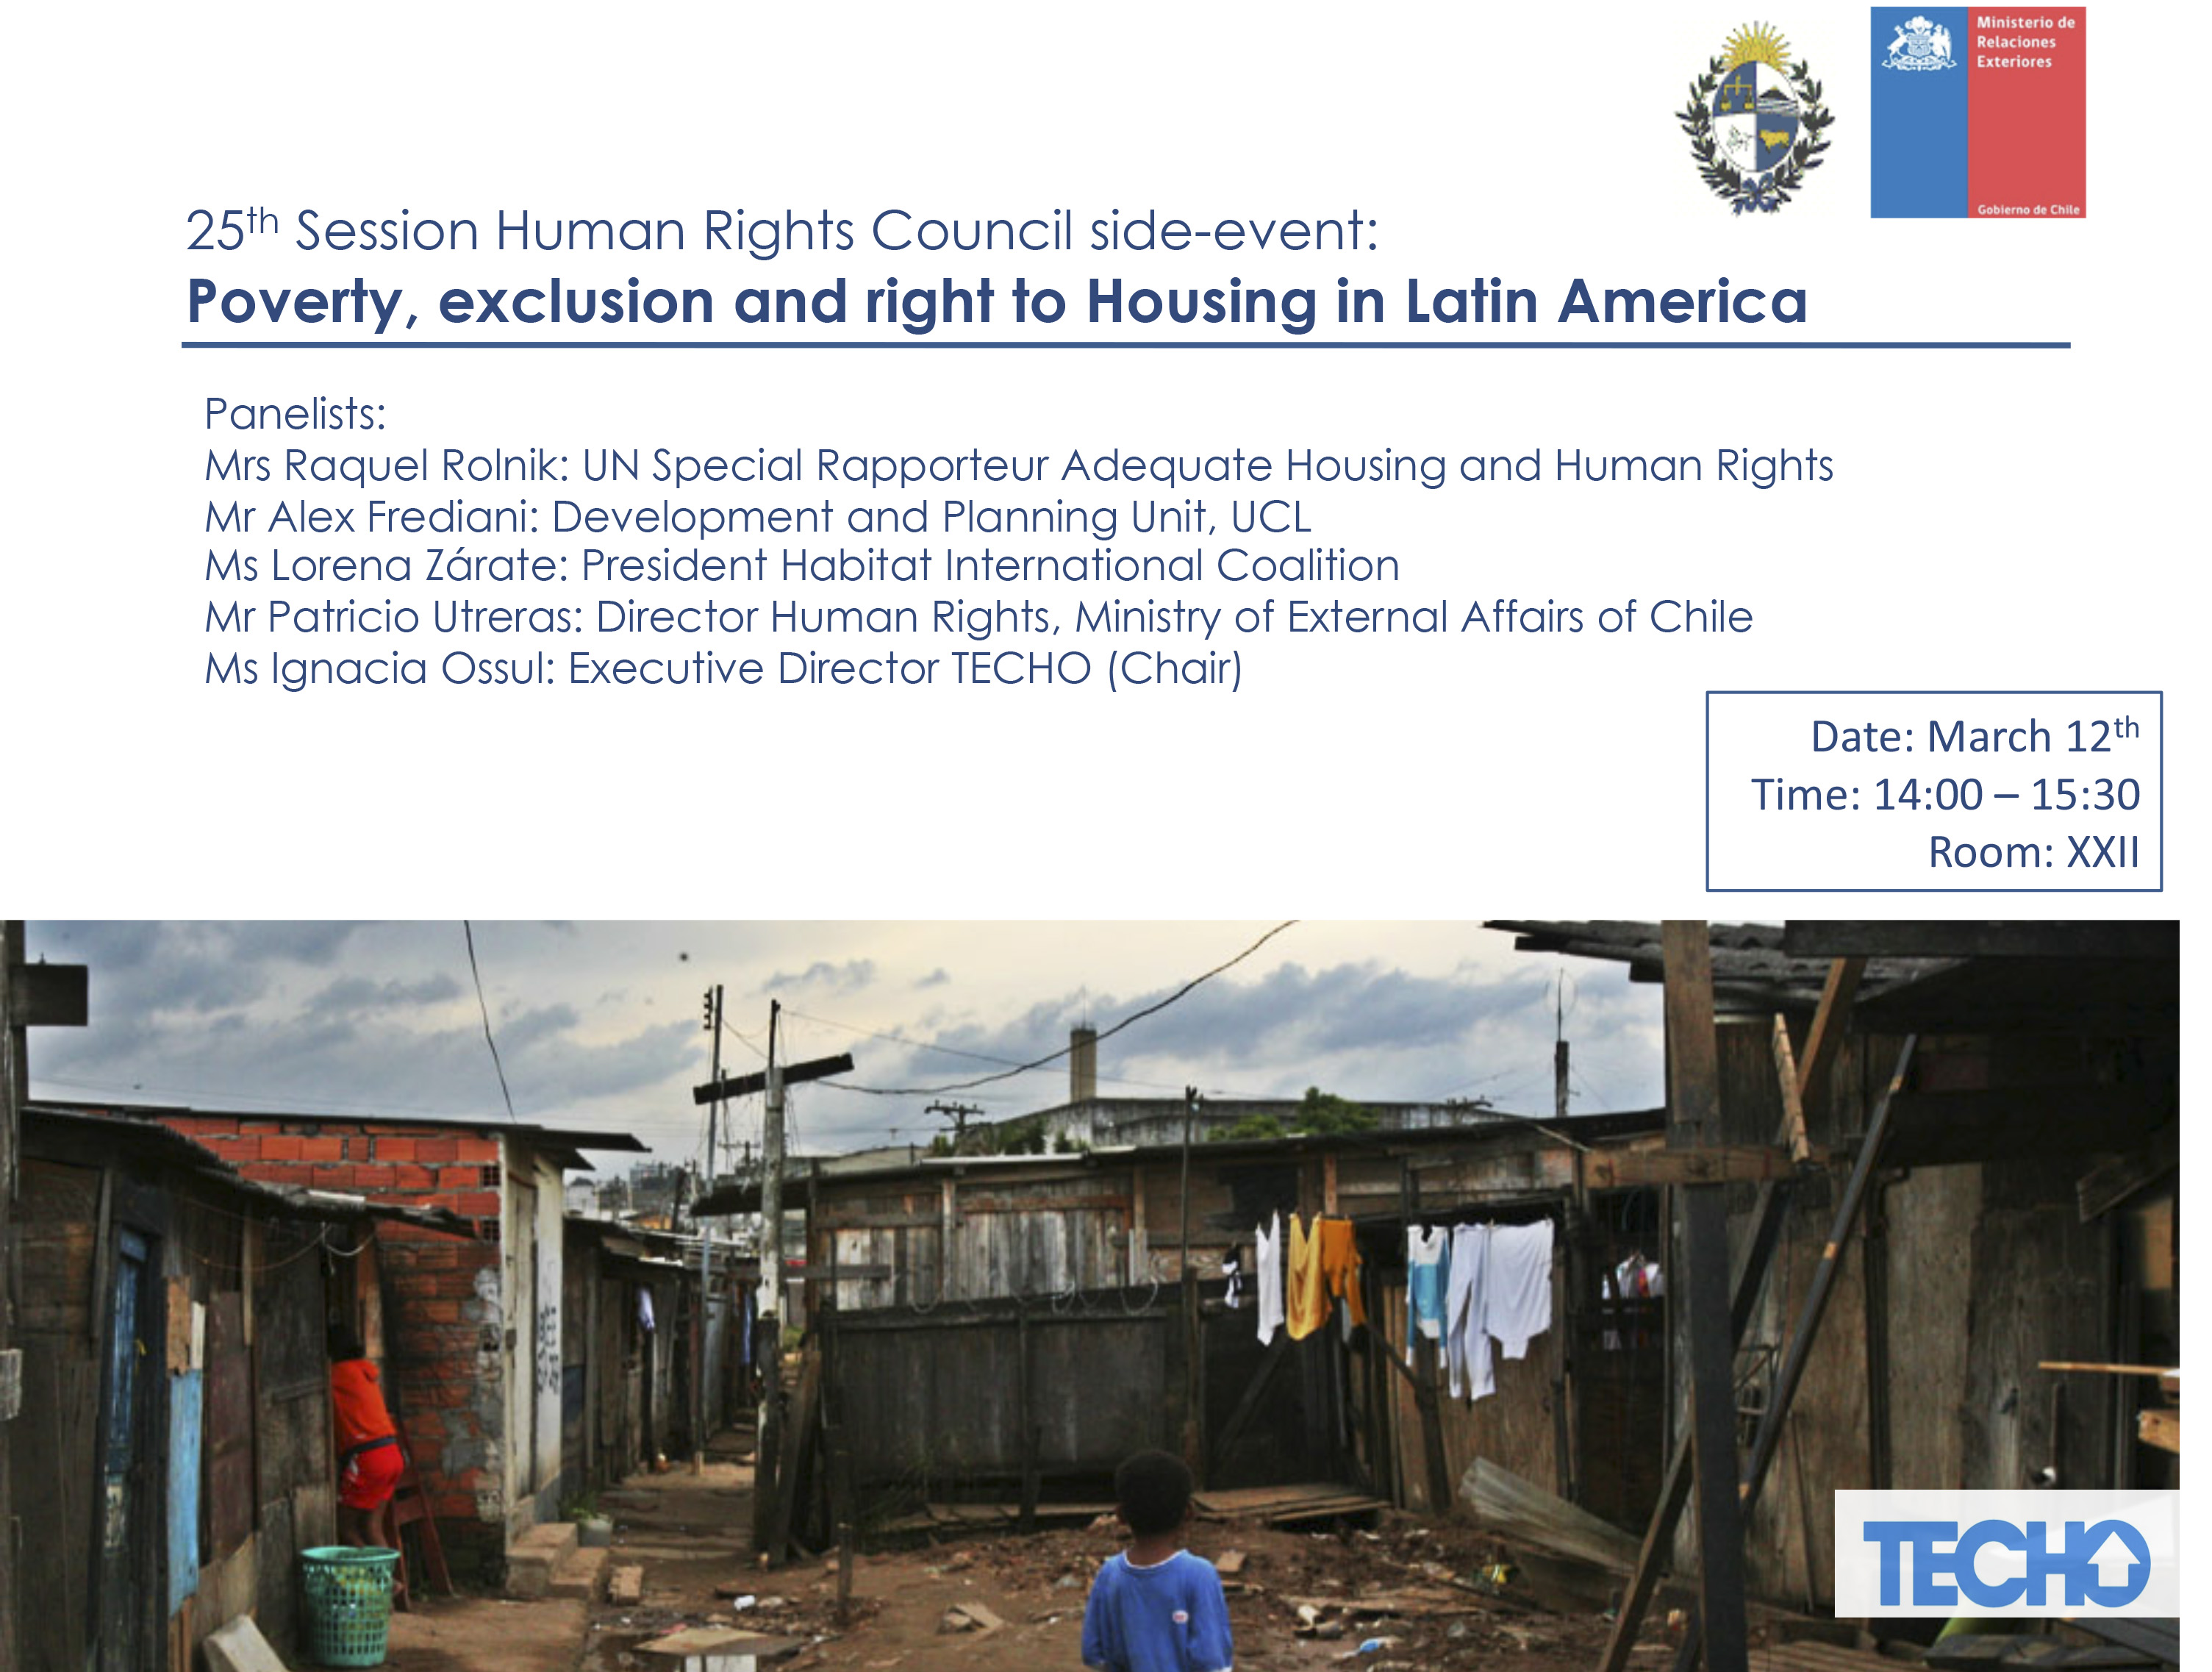 Video: 25th Session Human Rights Council side-event: Poverty, exclusion and right to Housing in Latin America.